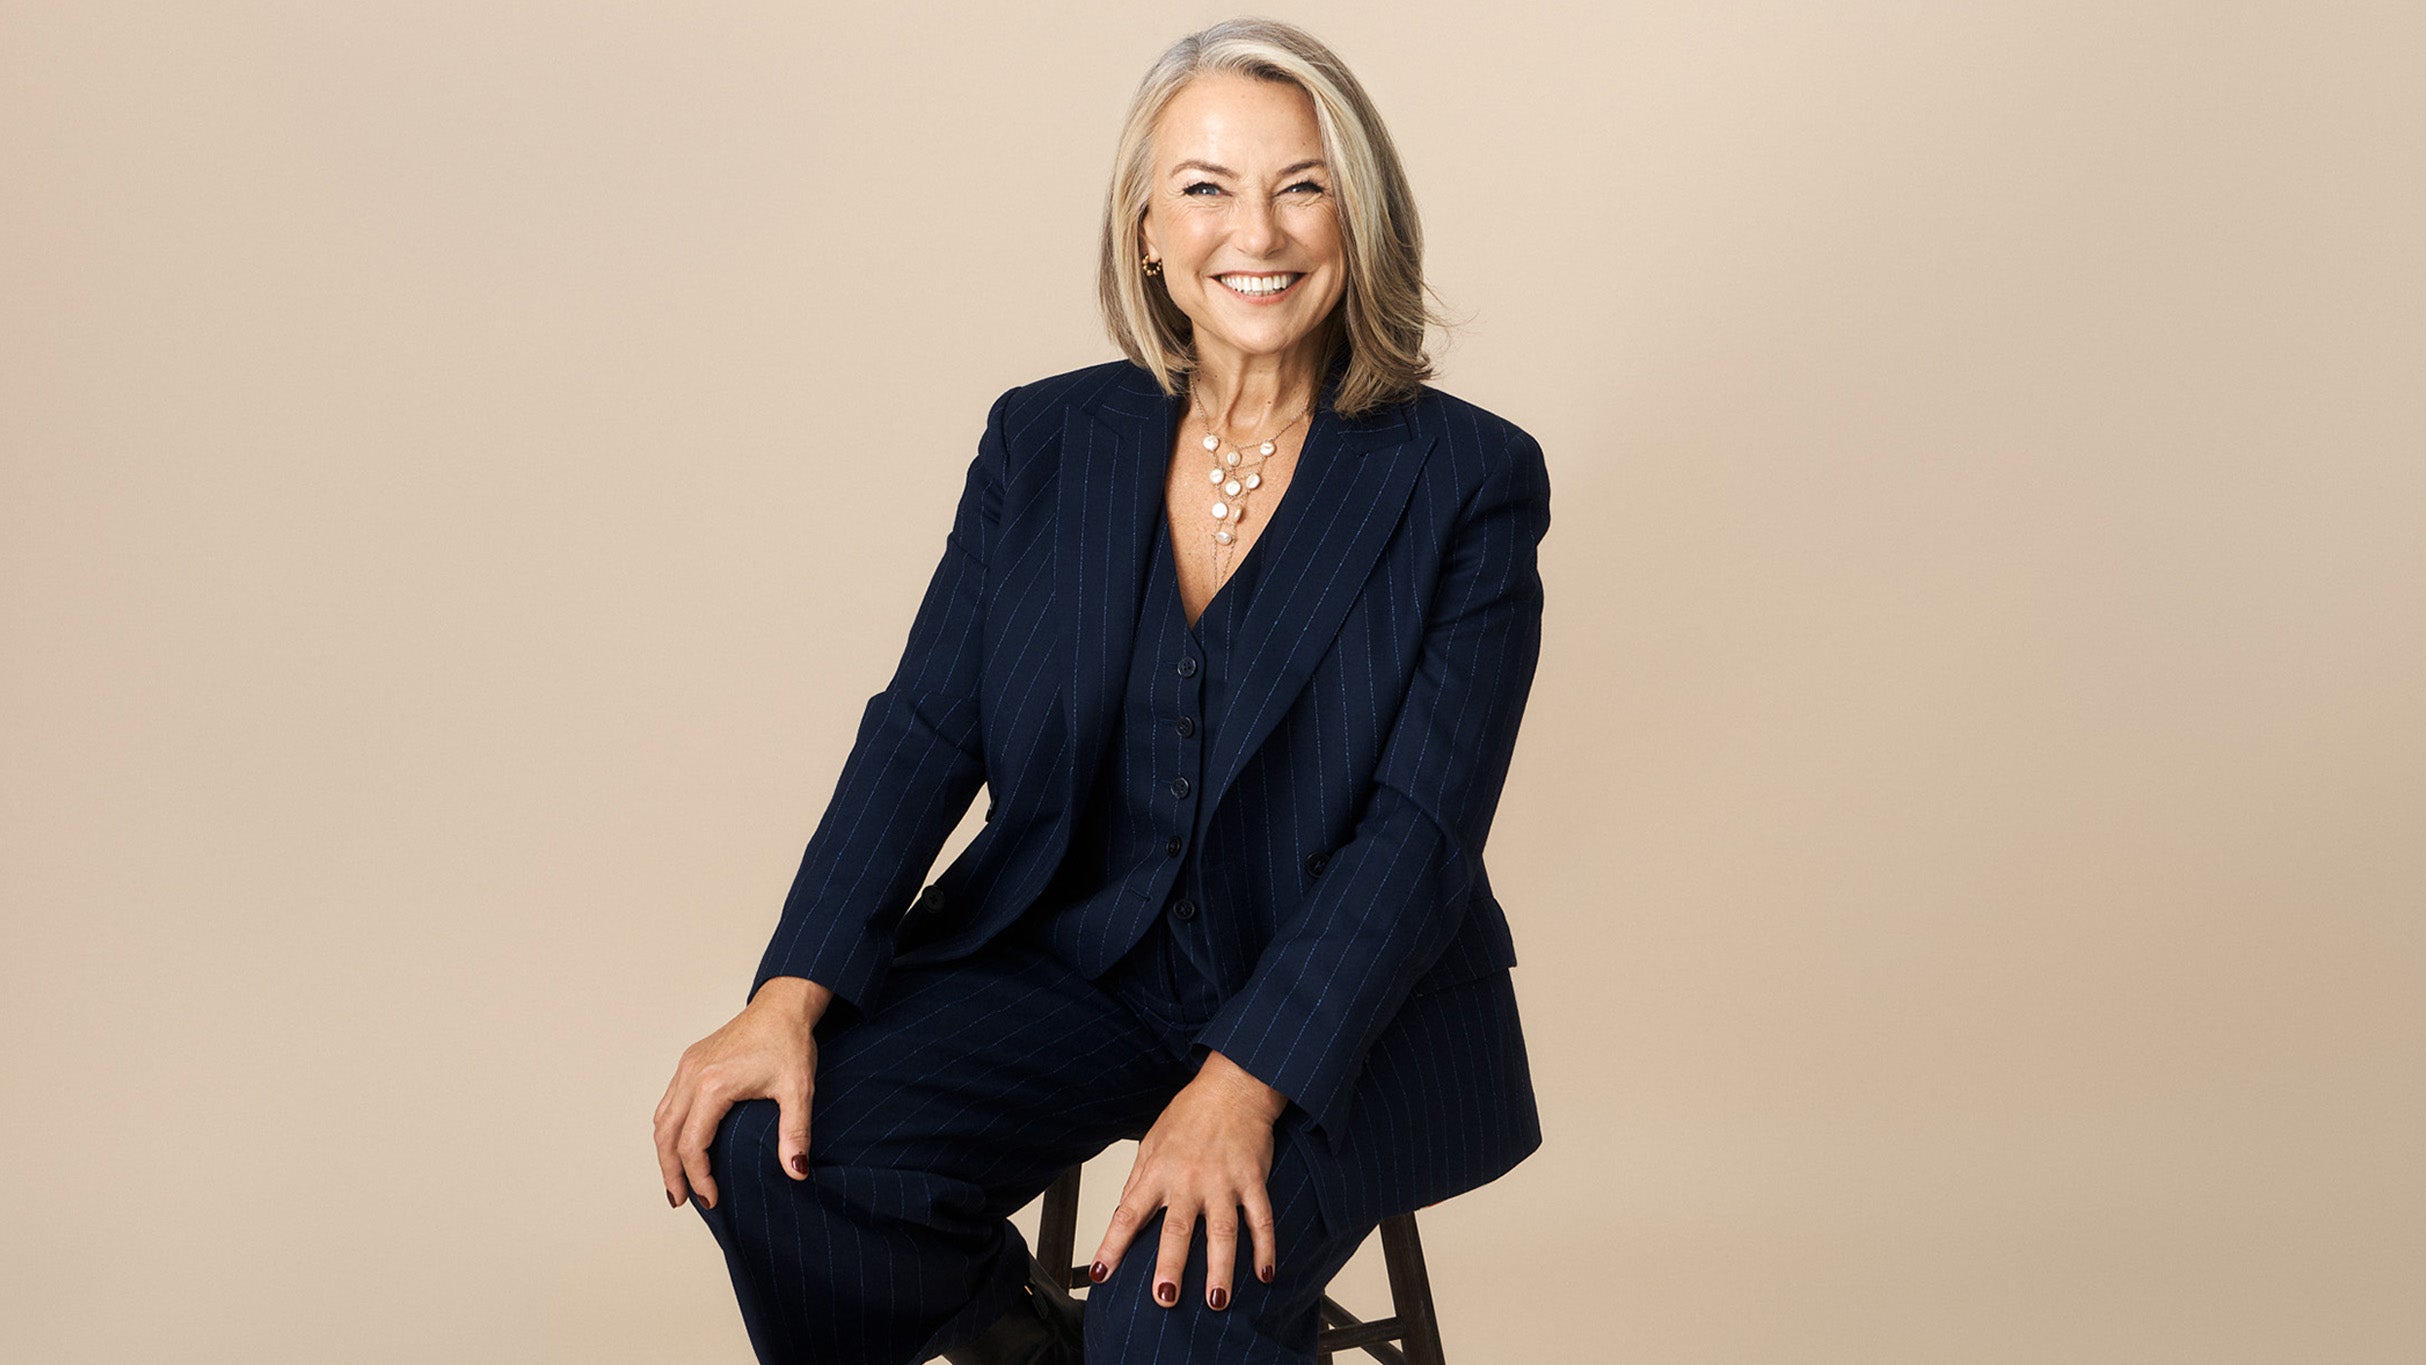 Esther Perel: The Future of Relationships, Love & Desire in New York promo photo for City National Bank Cardholder Preferred presale offer code